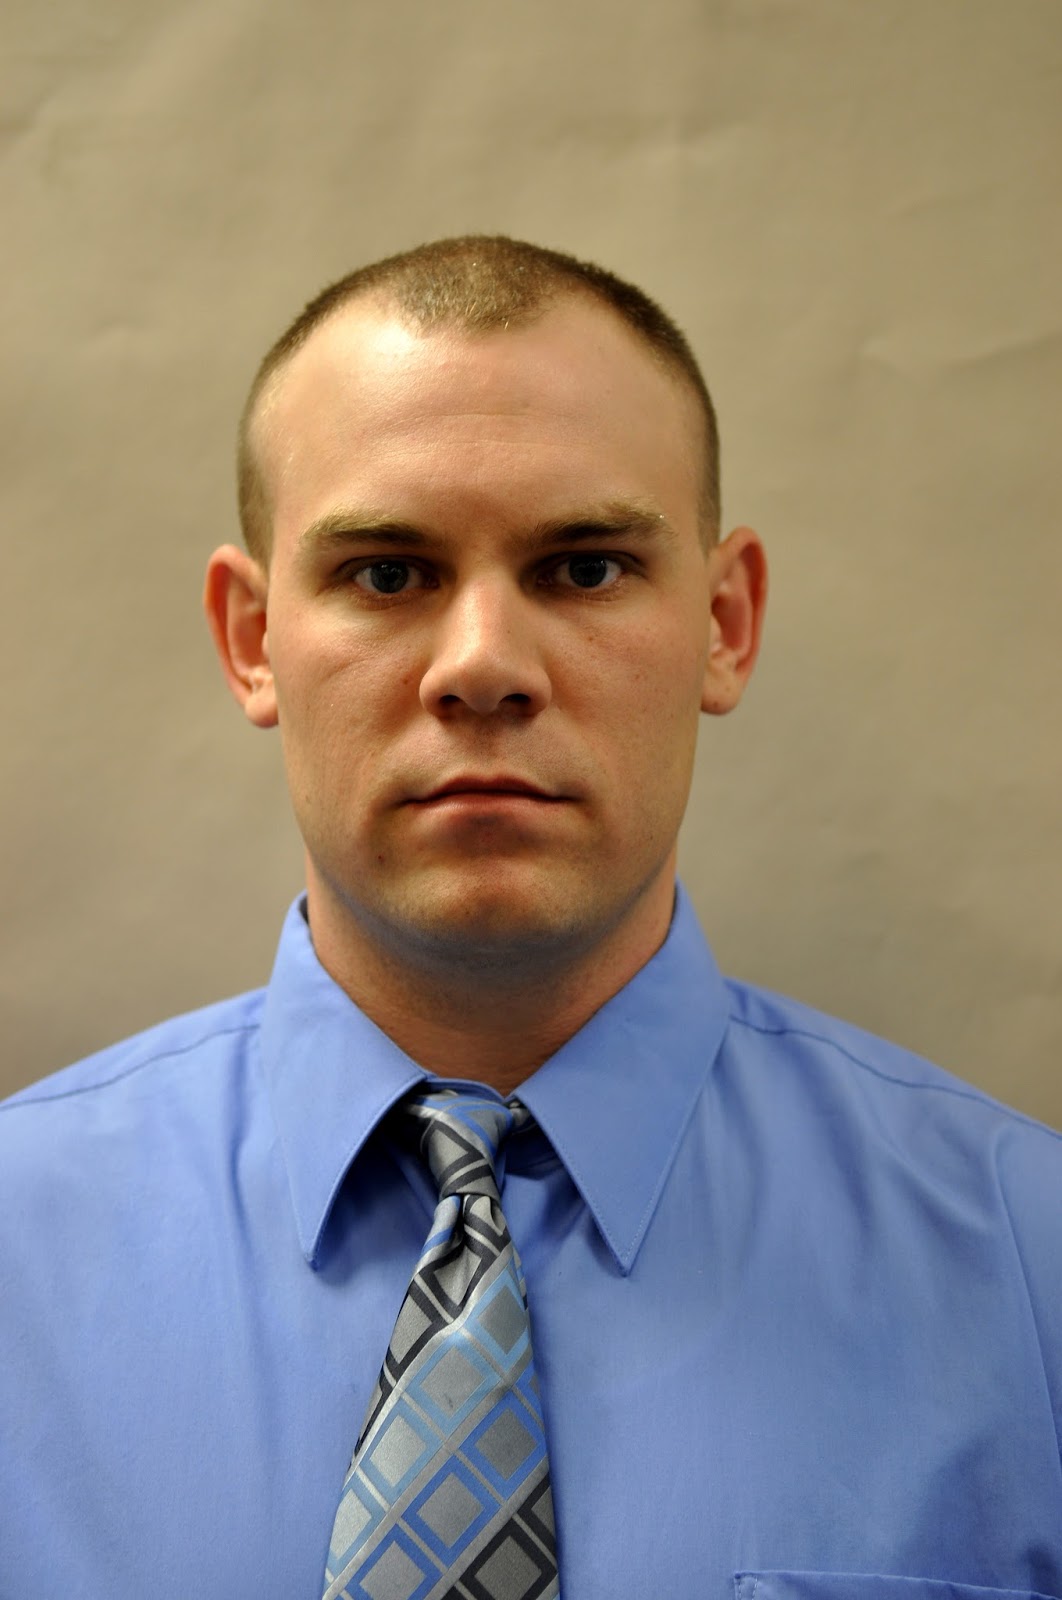 Deputy First Class Blaine Gaskill, a school resource officer at Great Mills High School in Maryland. (Courtesy of the St. Mary’s County Sheriff's Office)